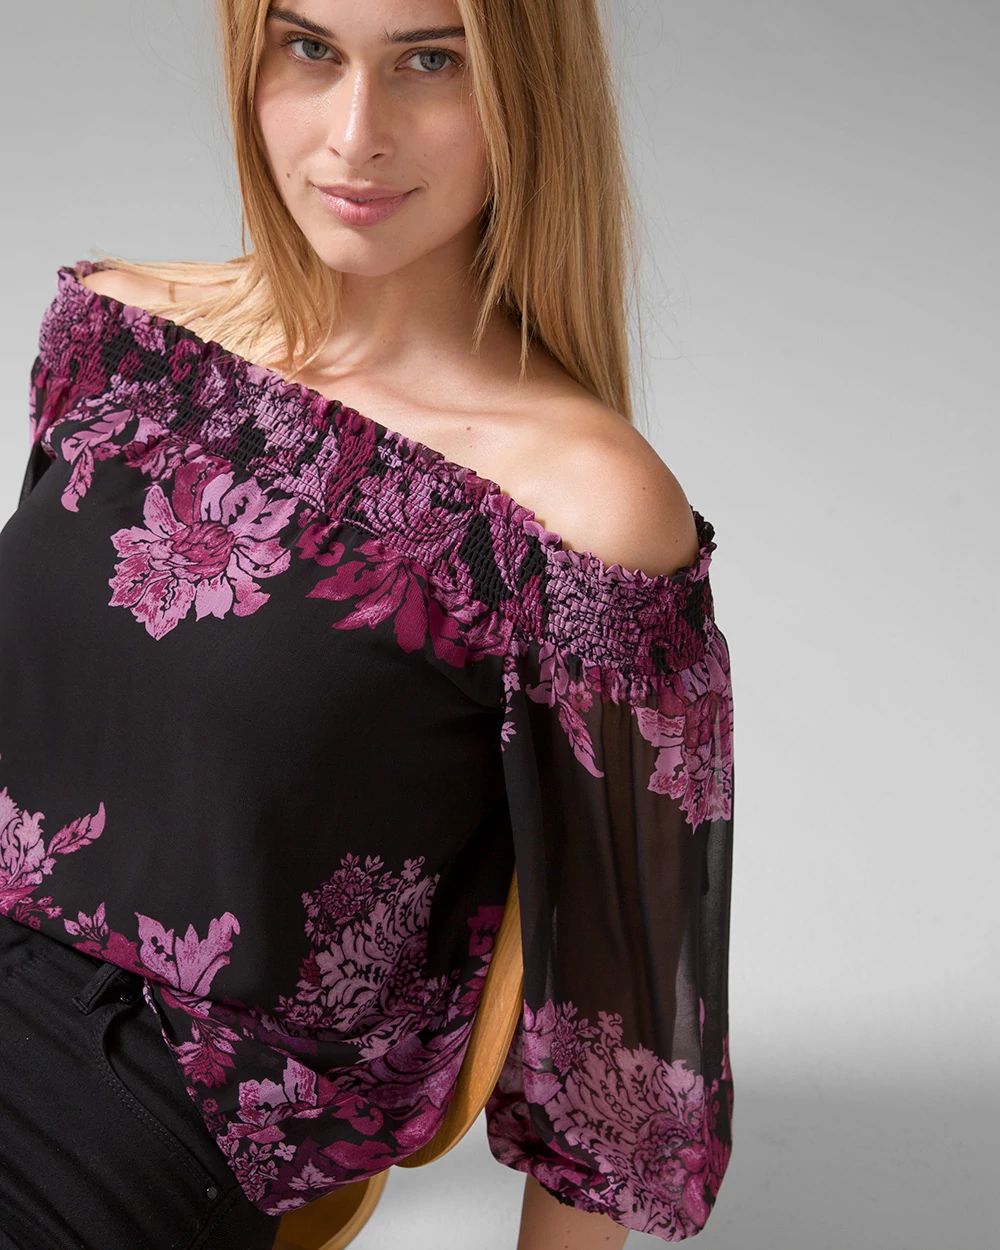 Off-the-Shoulder Floral Blouse click to view larger image.